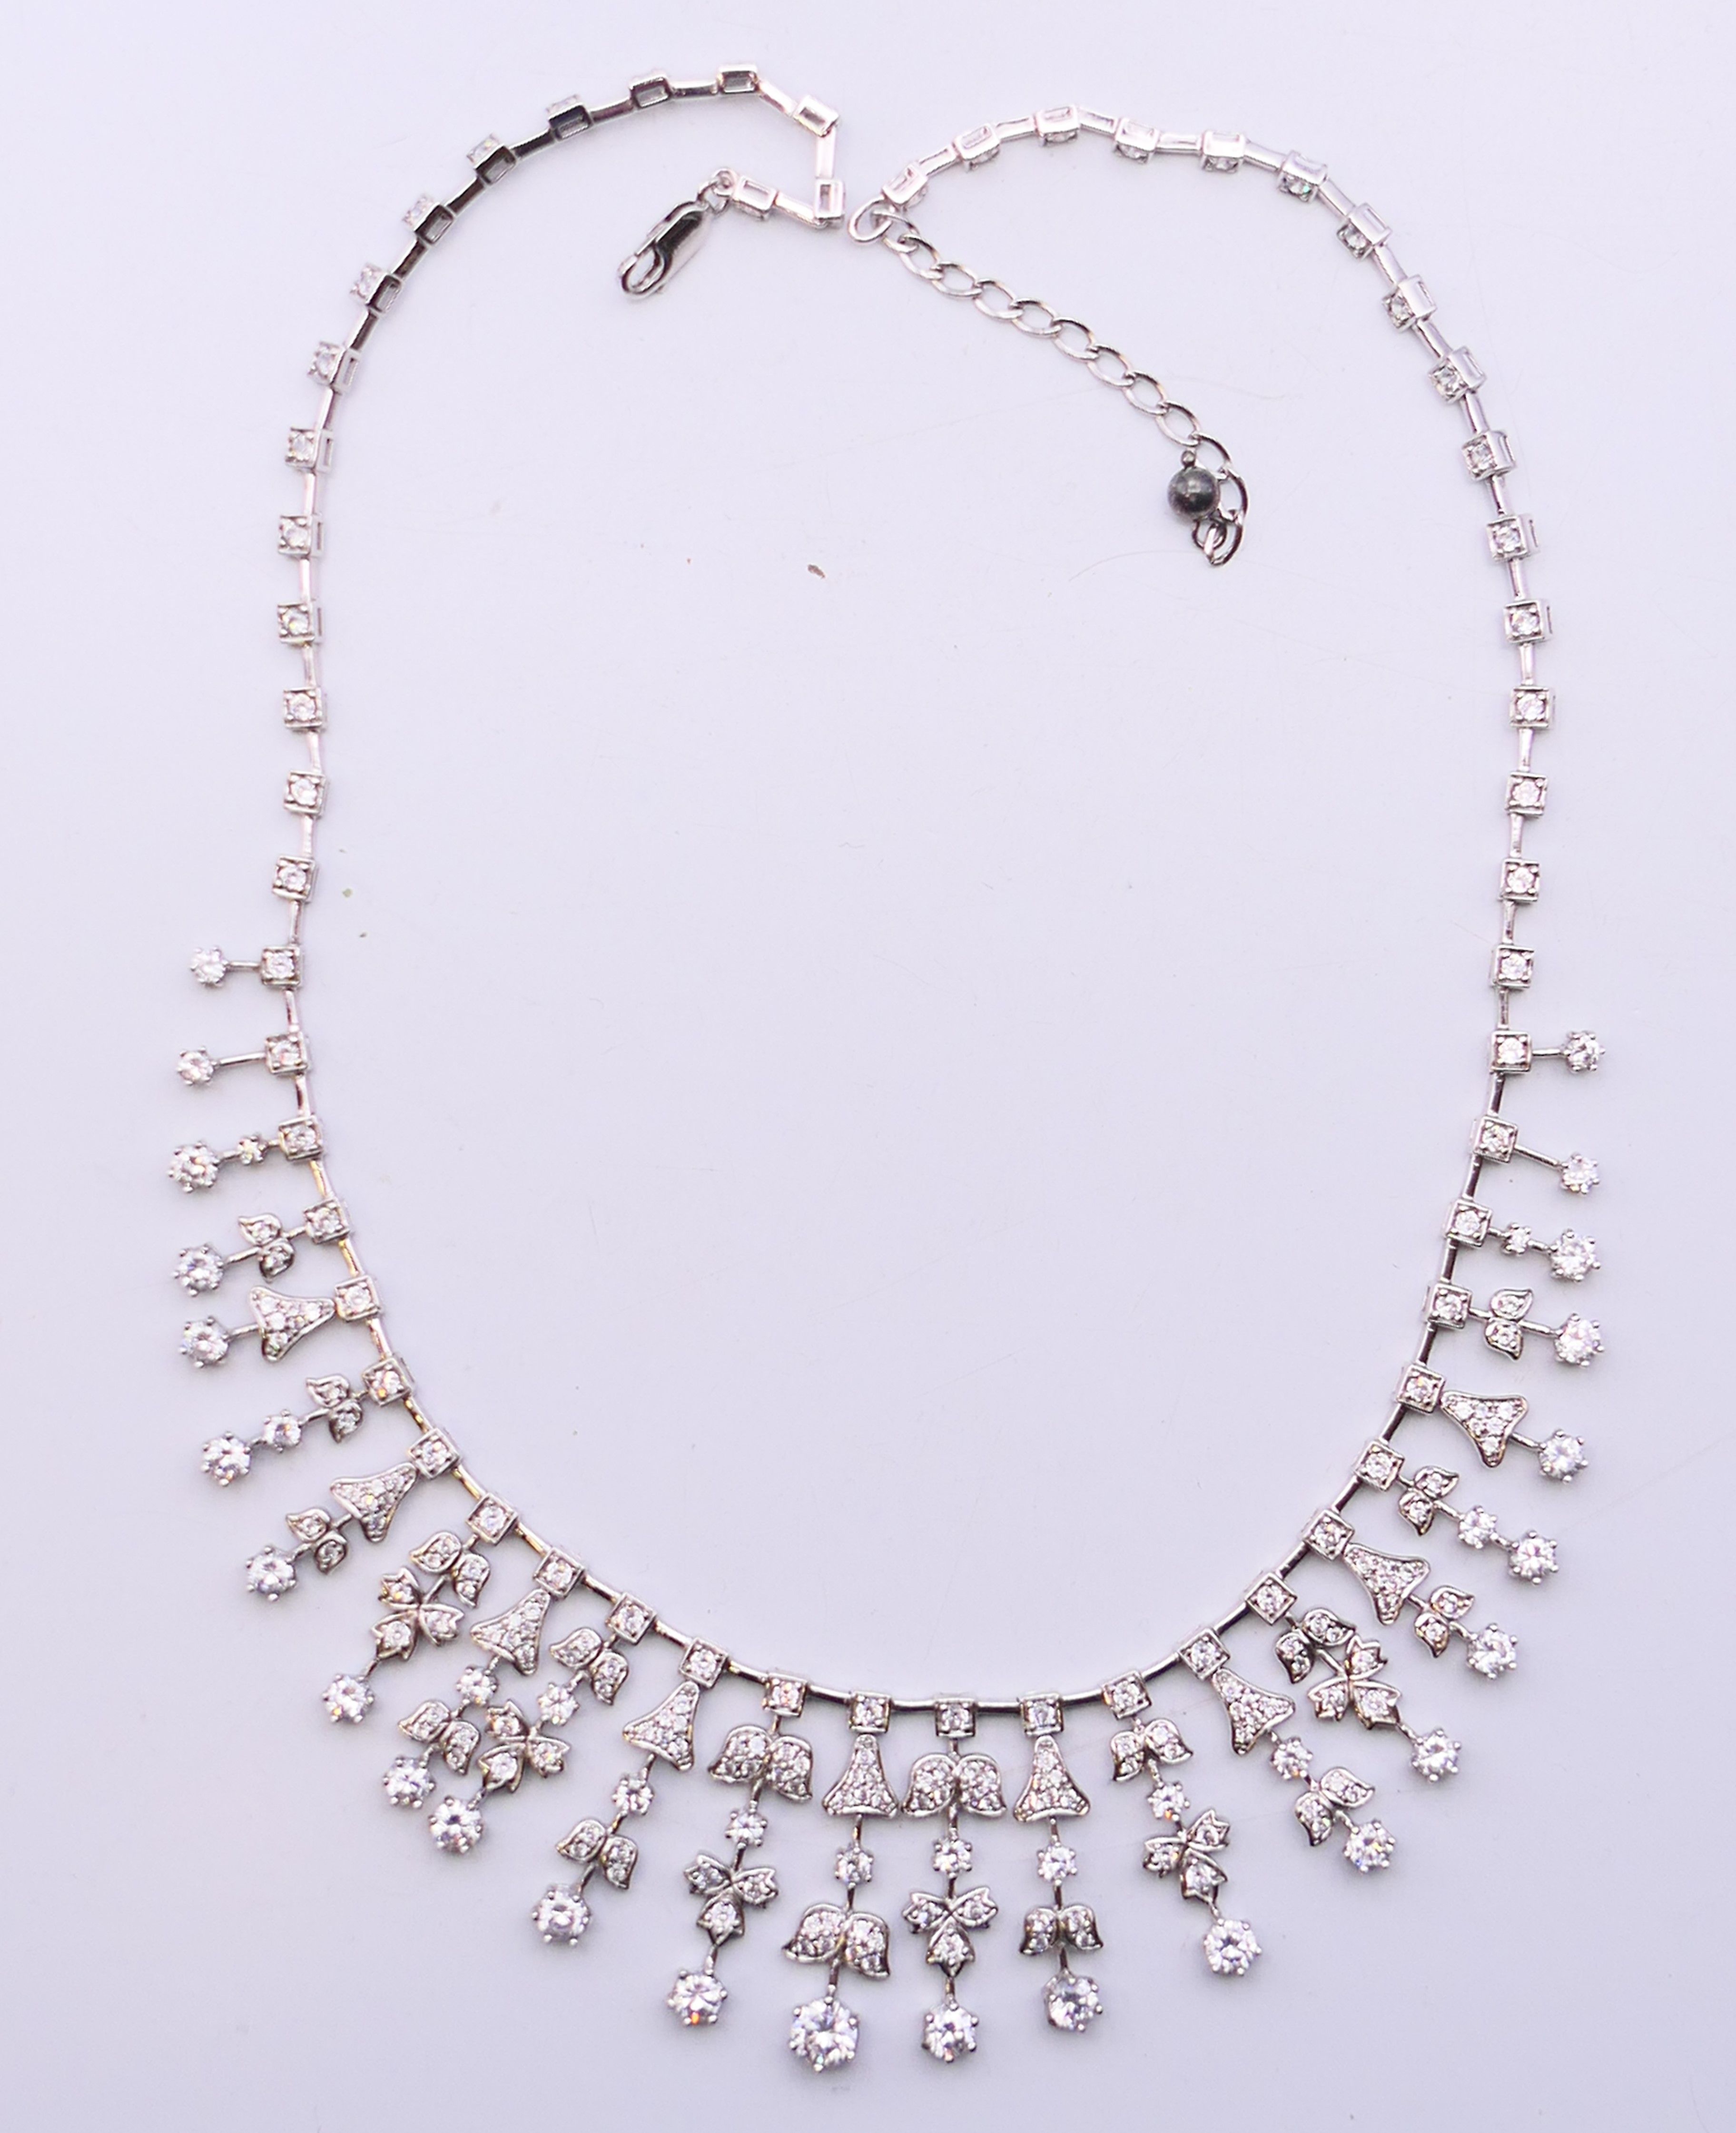 An impressive white stone and silver necklace. 50 cm long. - Image 2 of 6